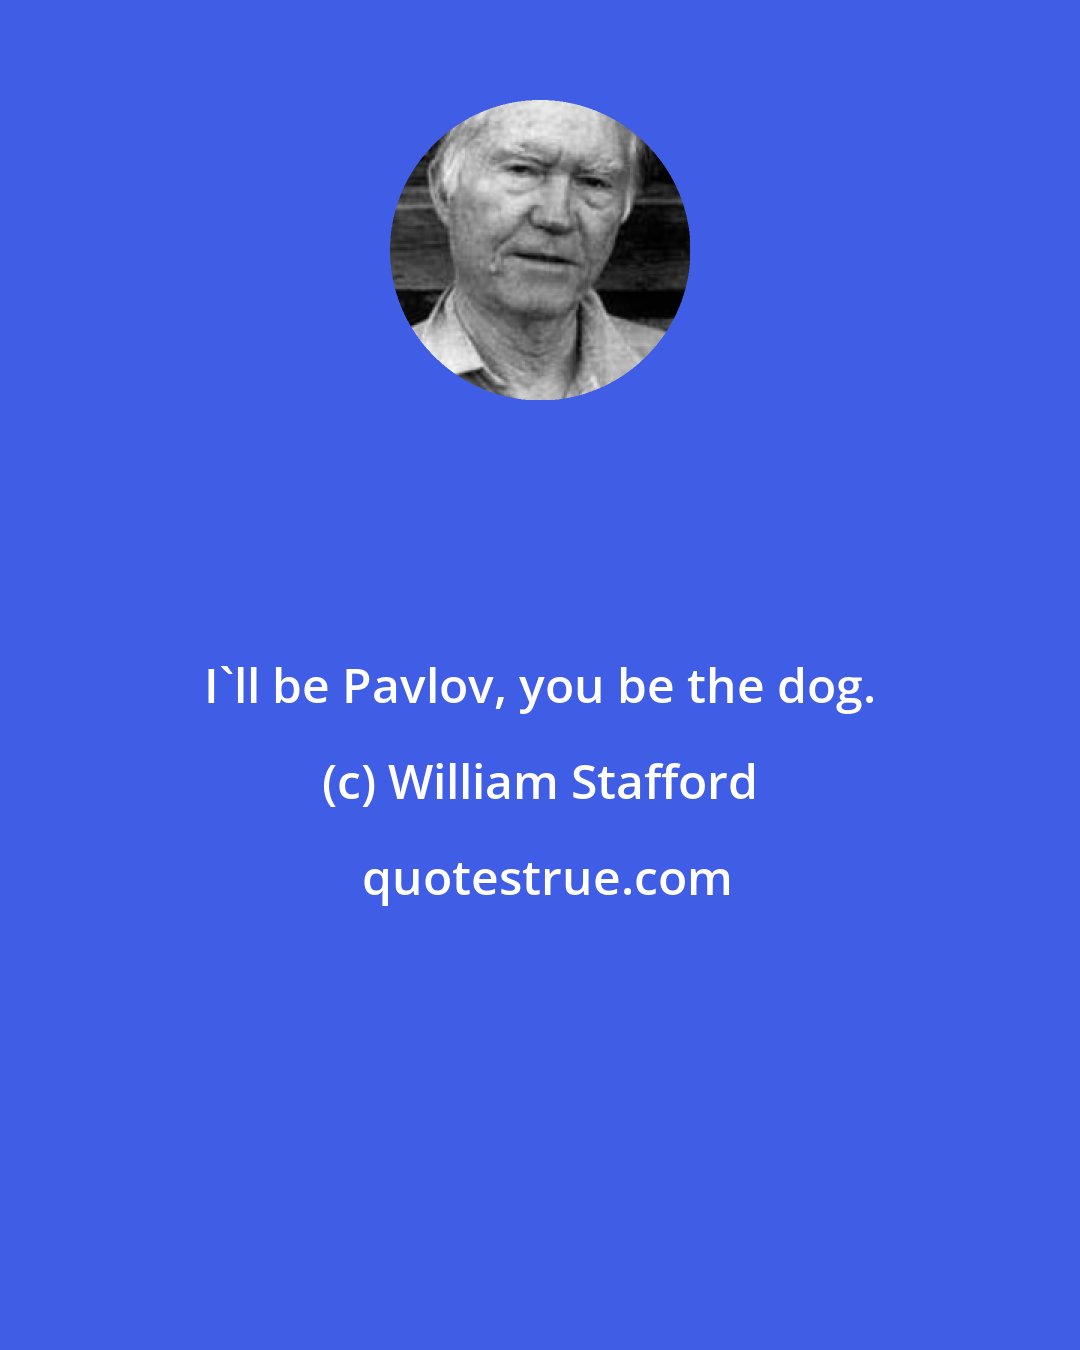 William Stafford: I'll be Pavlov, you be the dog.